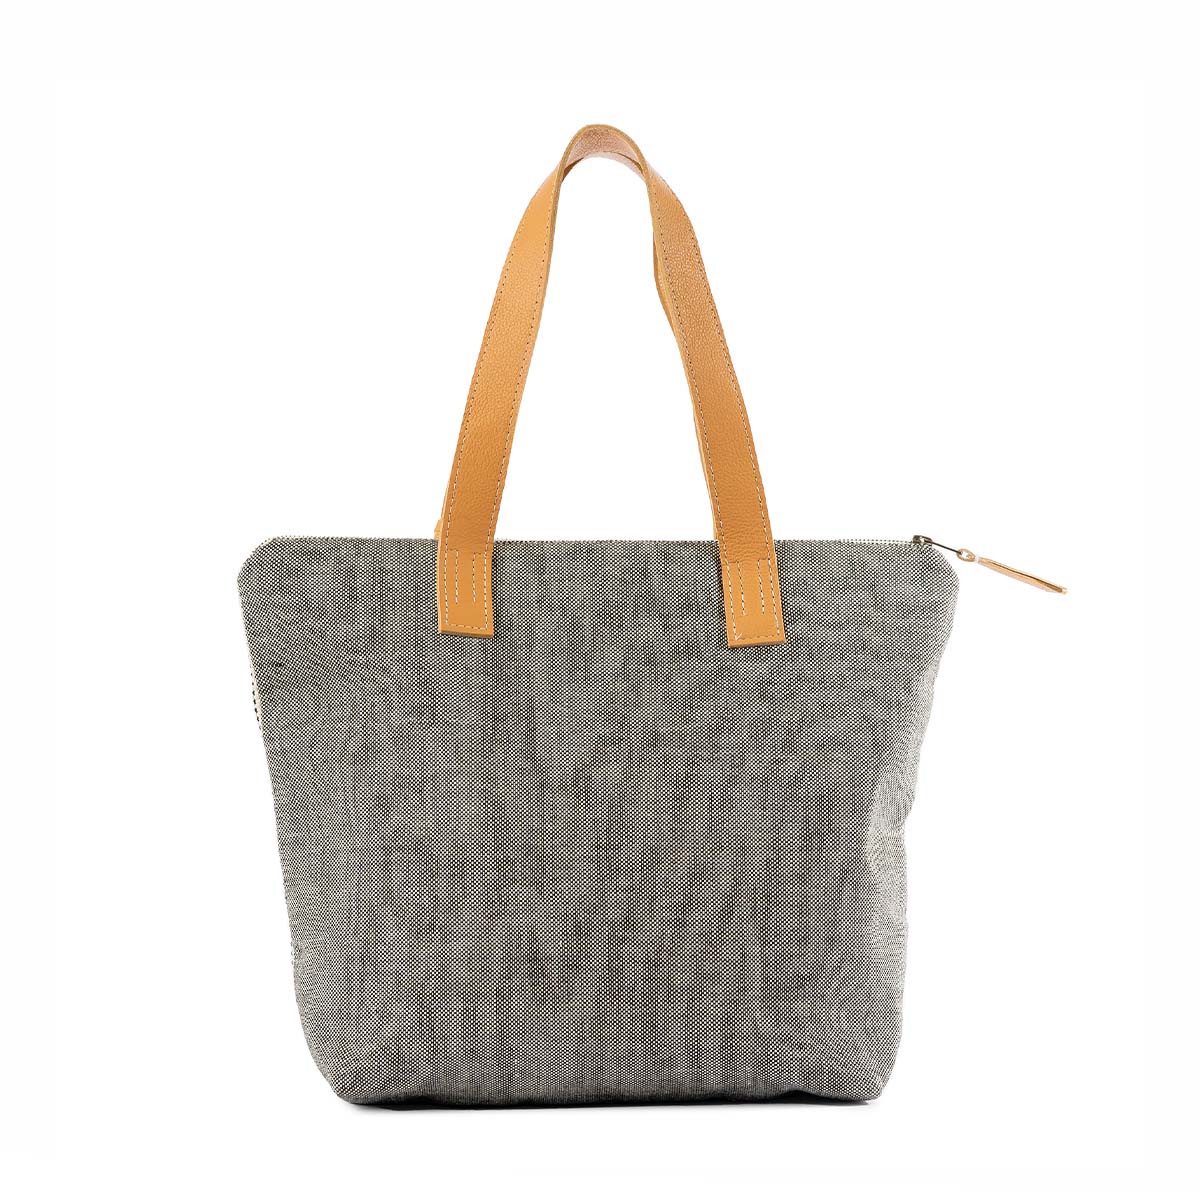 The back of the Angela Tote in Tourmaline color. The back has a solid grey woven color. It has leather handles and a leather zipper pull.